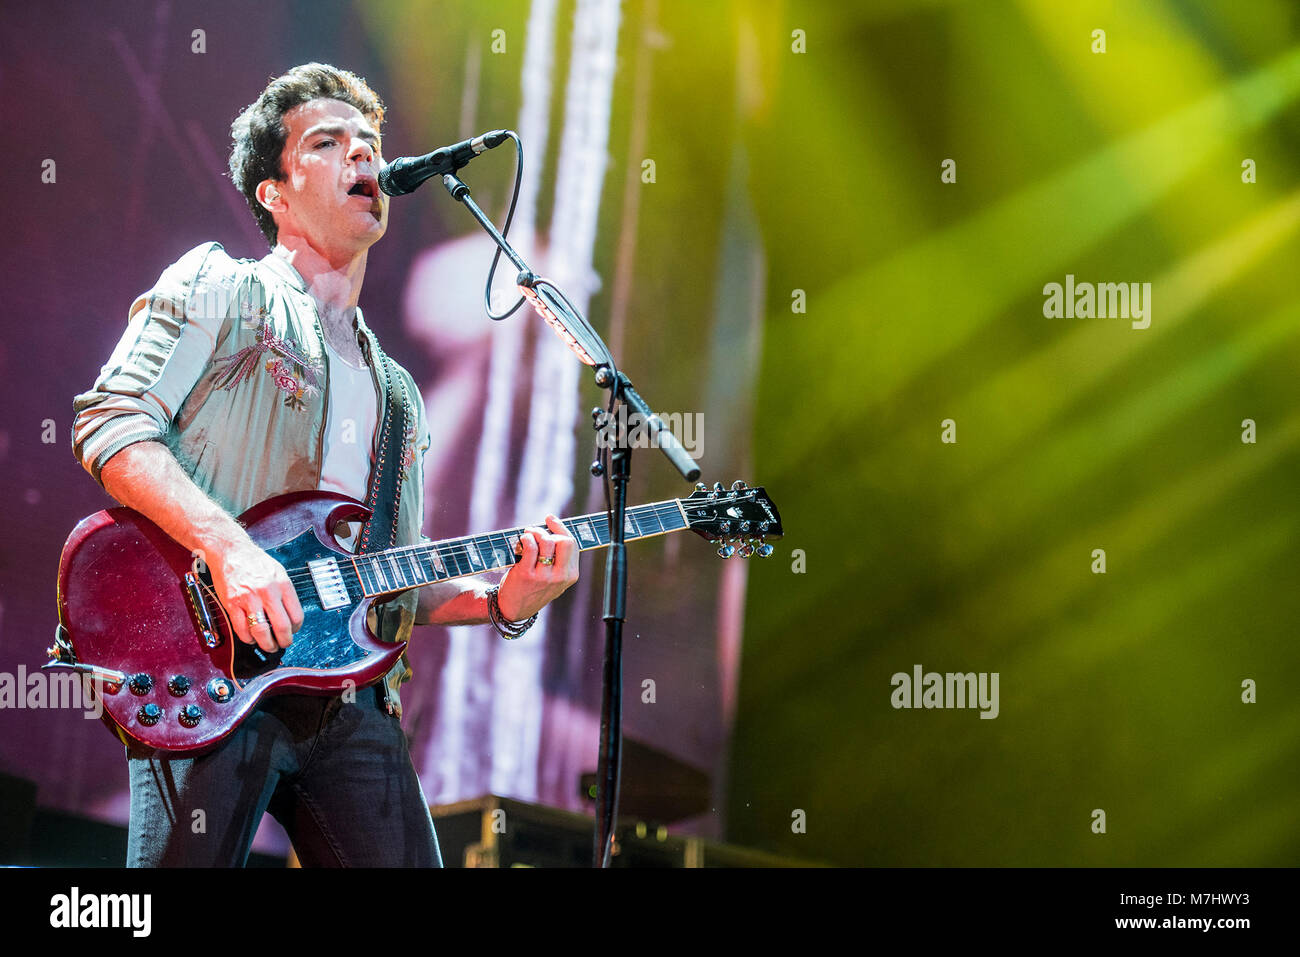 Leeds, UK. 10th March 2018. Kelly Jones, Richard Jones, Adam Zindani and Jamie Morrison of Welsh rock band Stereophonics perform at the Leeds First Direct Arena  10/03/2018 Credit: Gary Mather/Alamy Live News Stock Photo